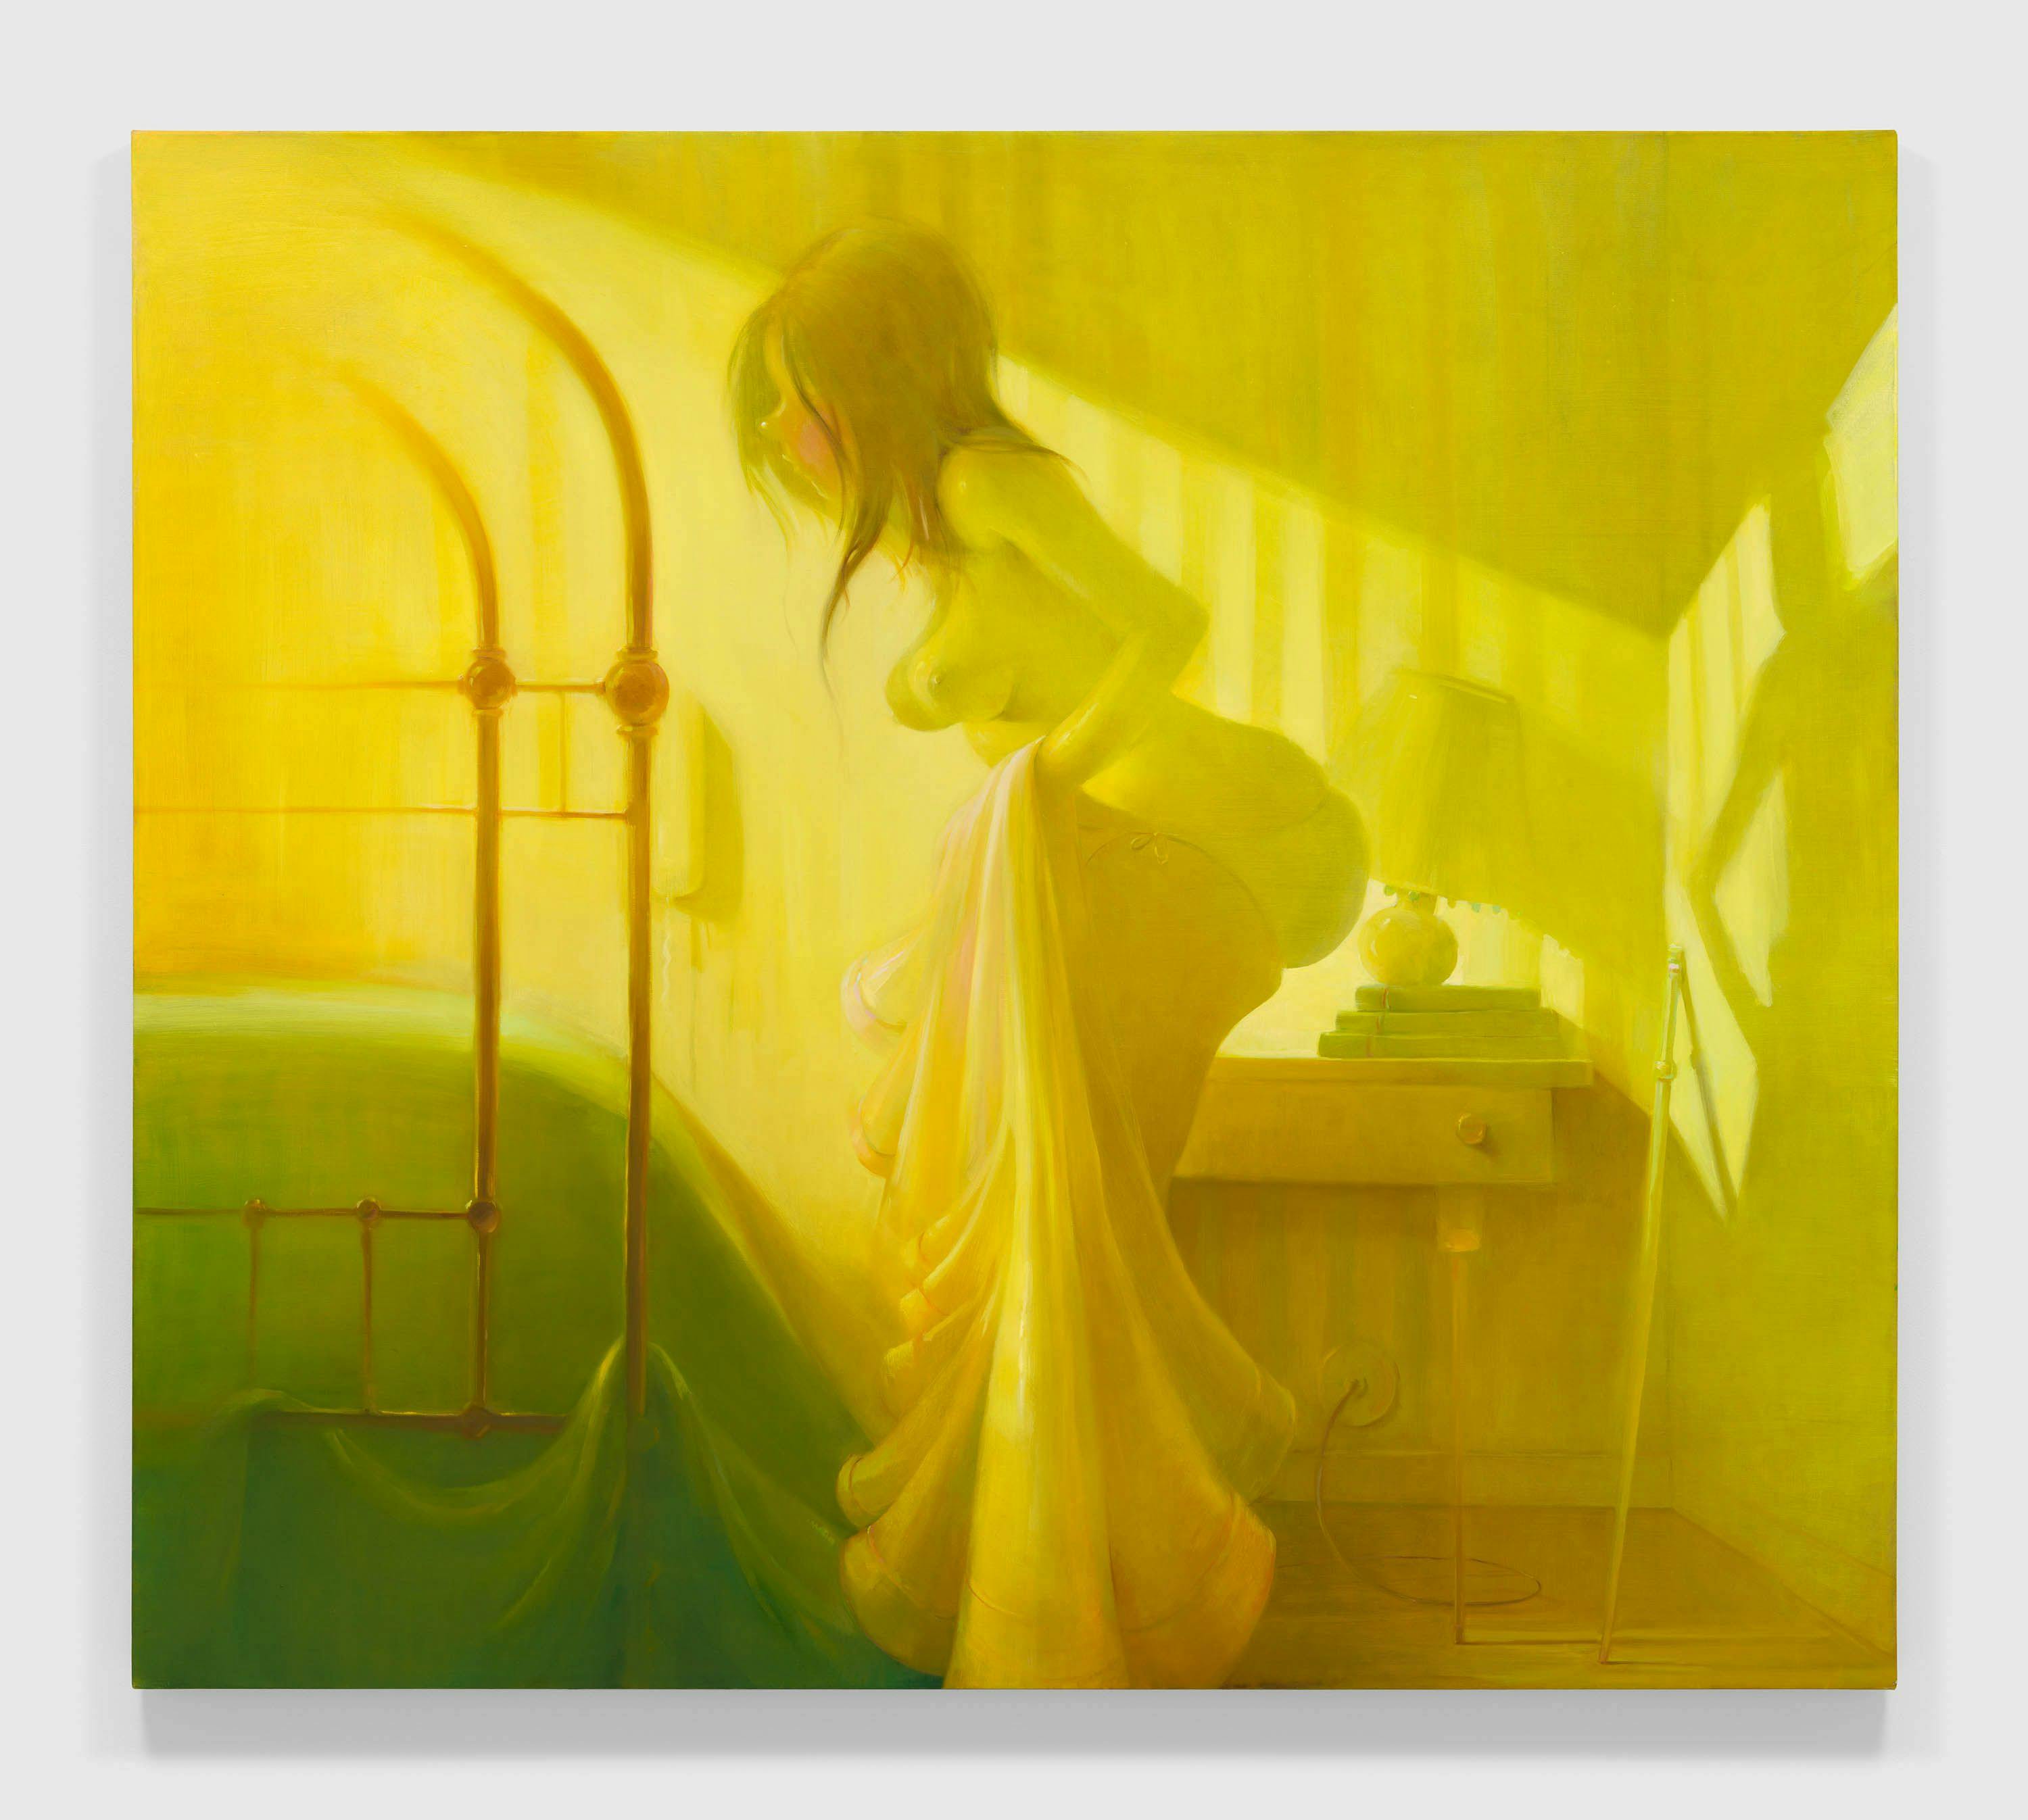 A painting by Lisa Yuskavage, titled Changing, dated 2005.